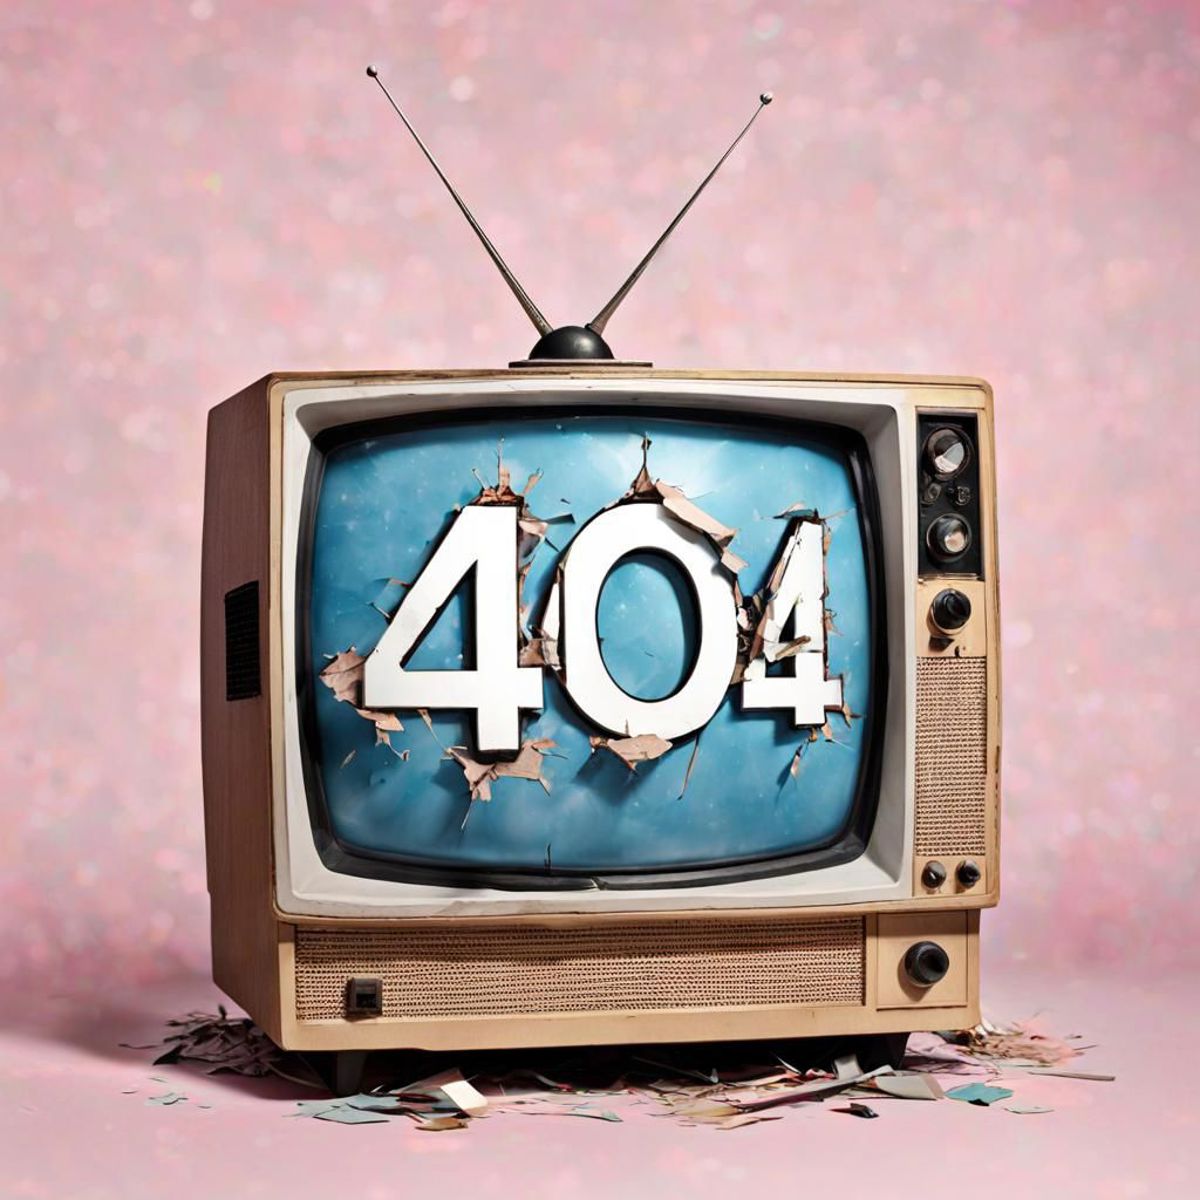 A television with the number 404 on it.